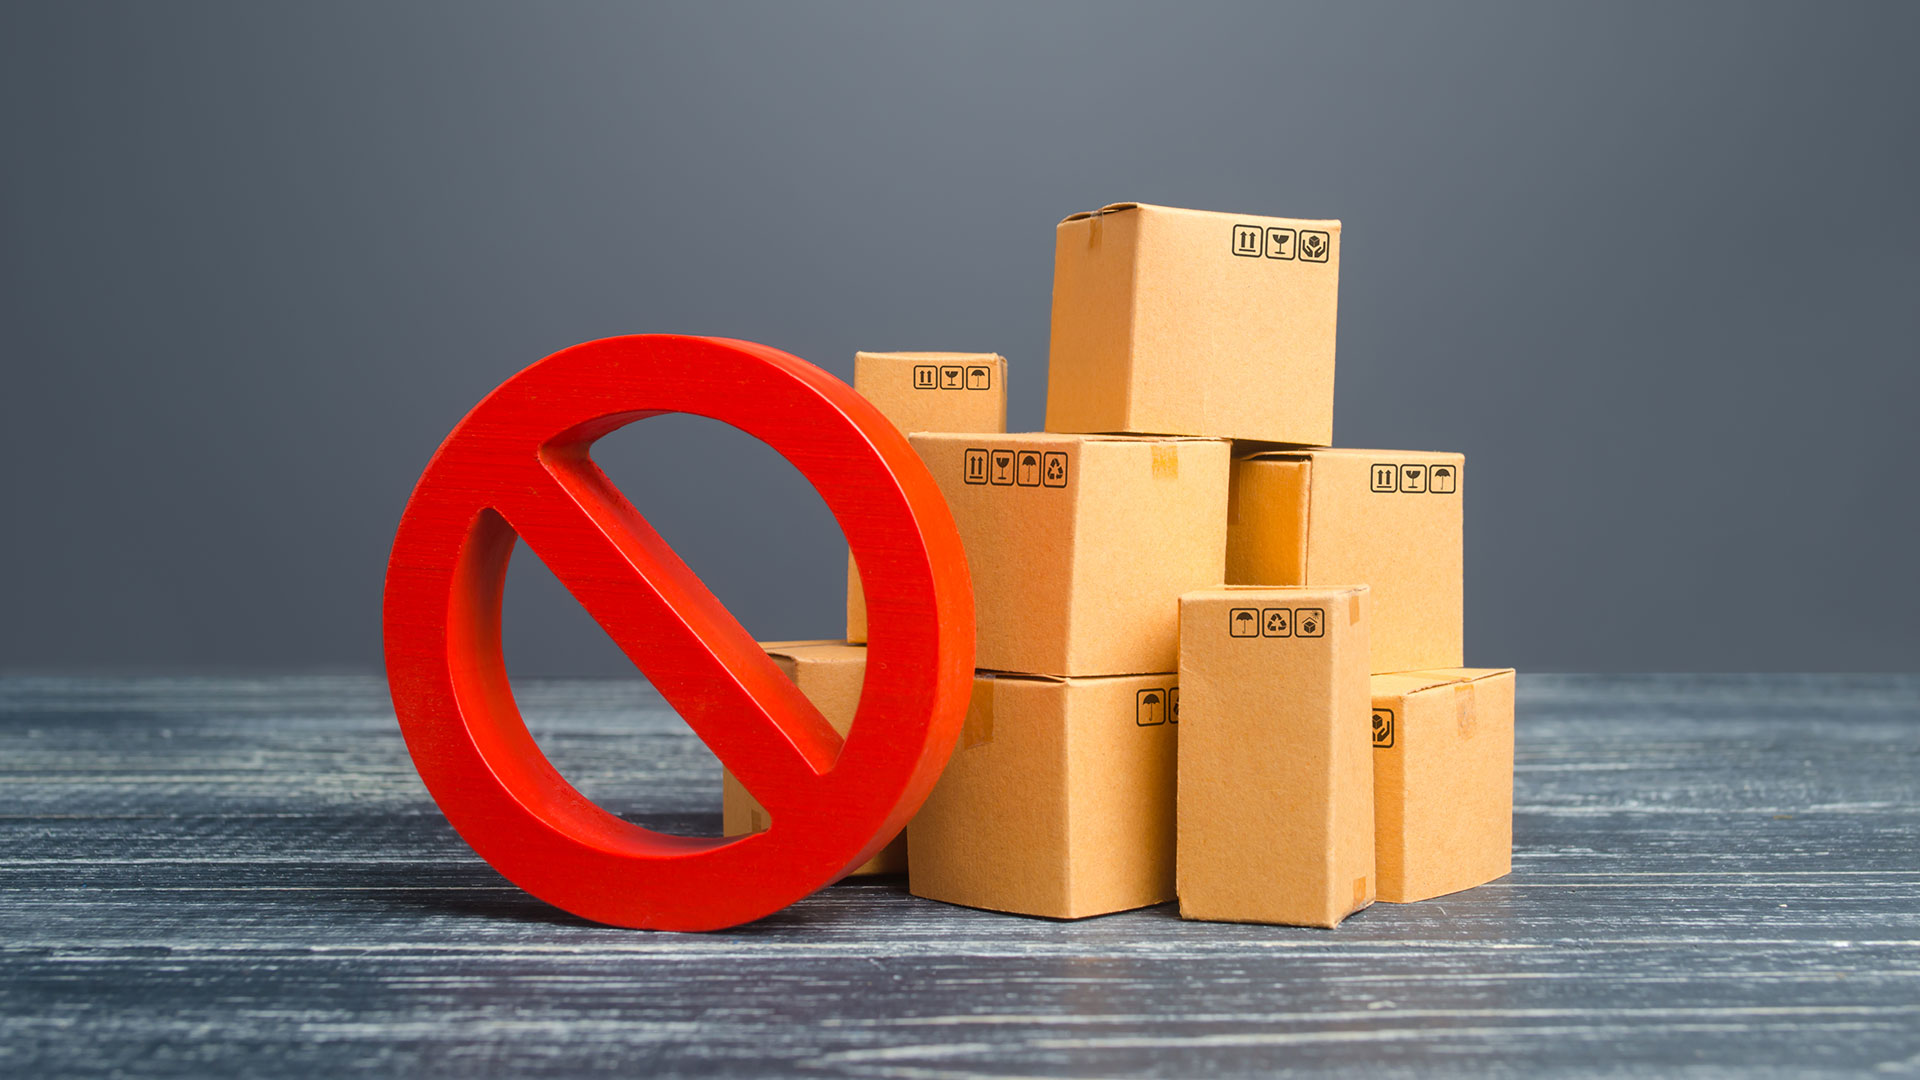 Small boxes stacked with a big red ban icon in front